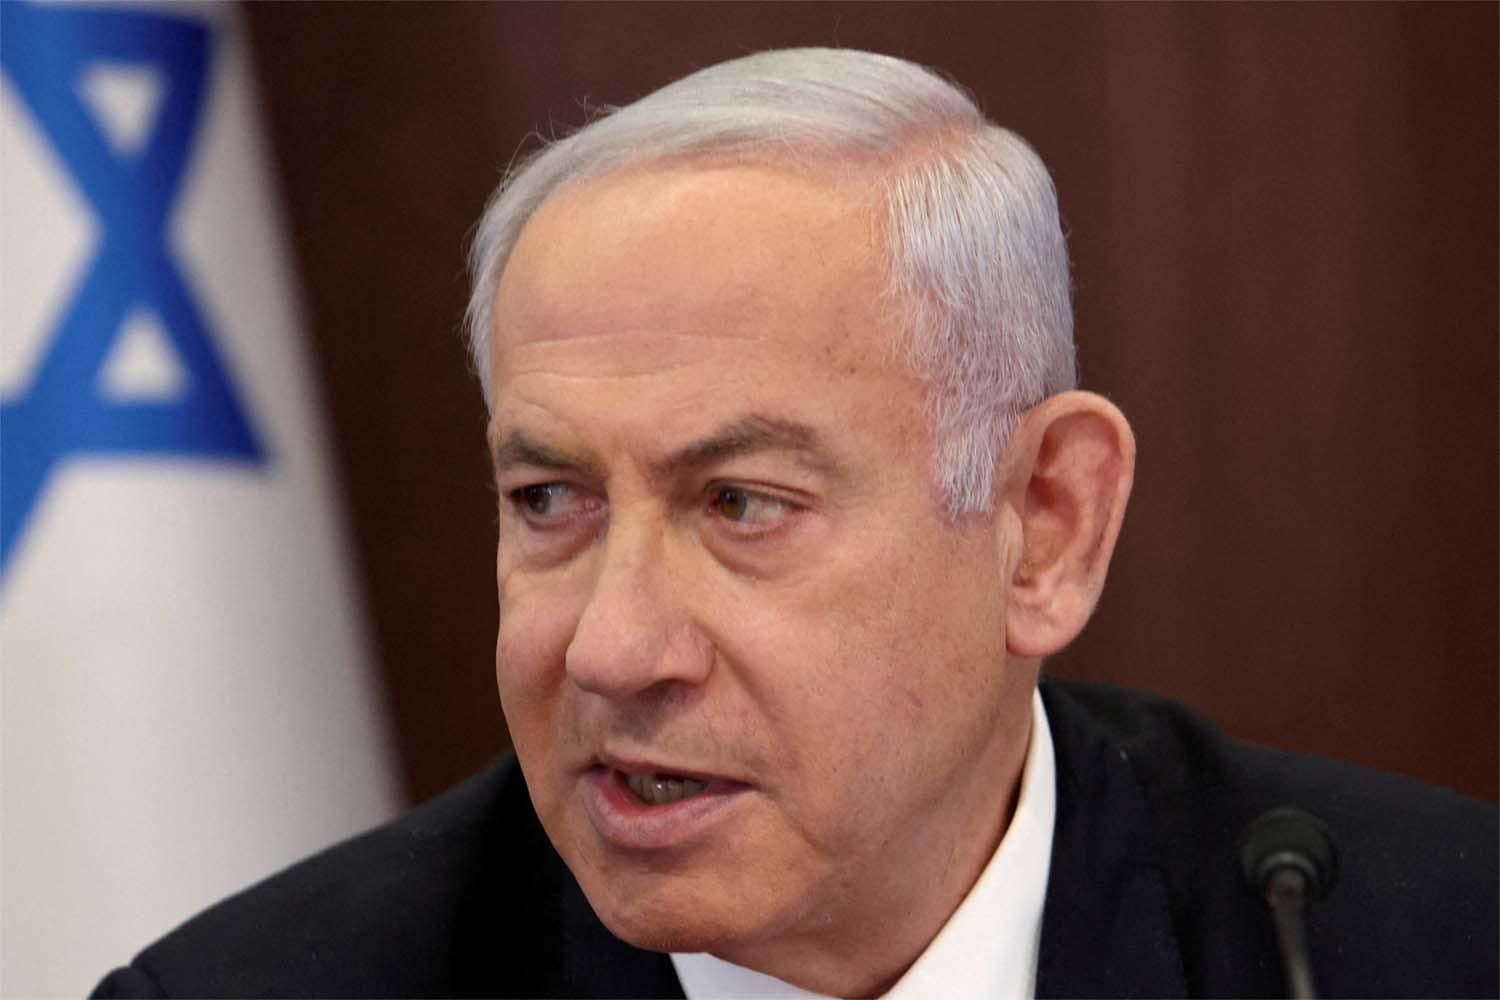 Netanyahu will be in Italy for a three-day visit